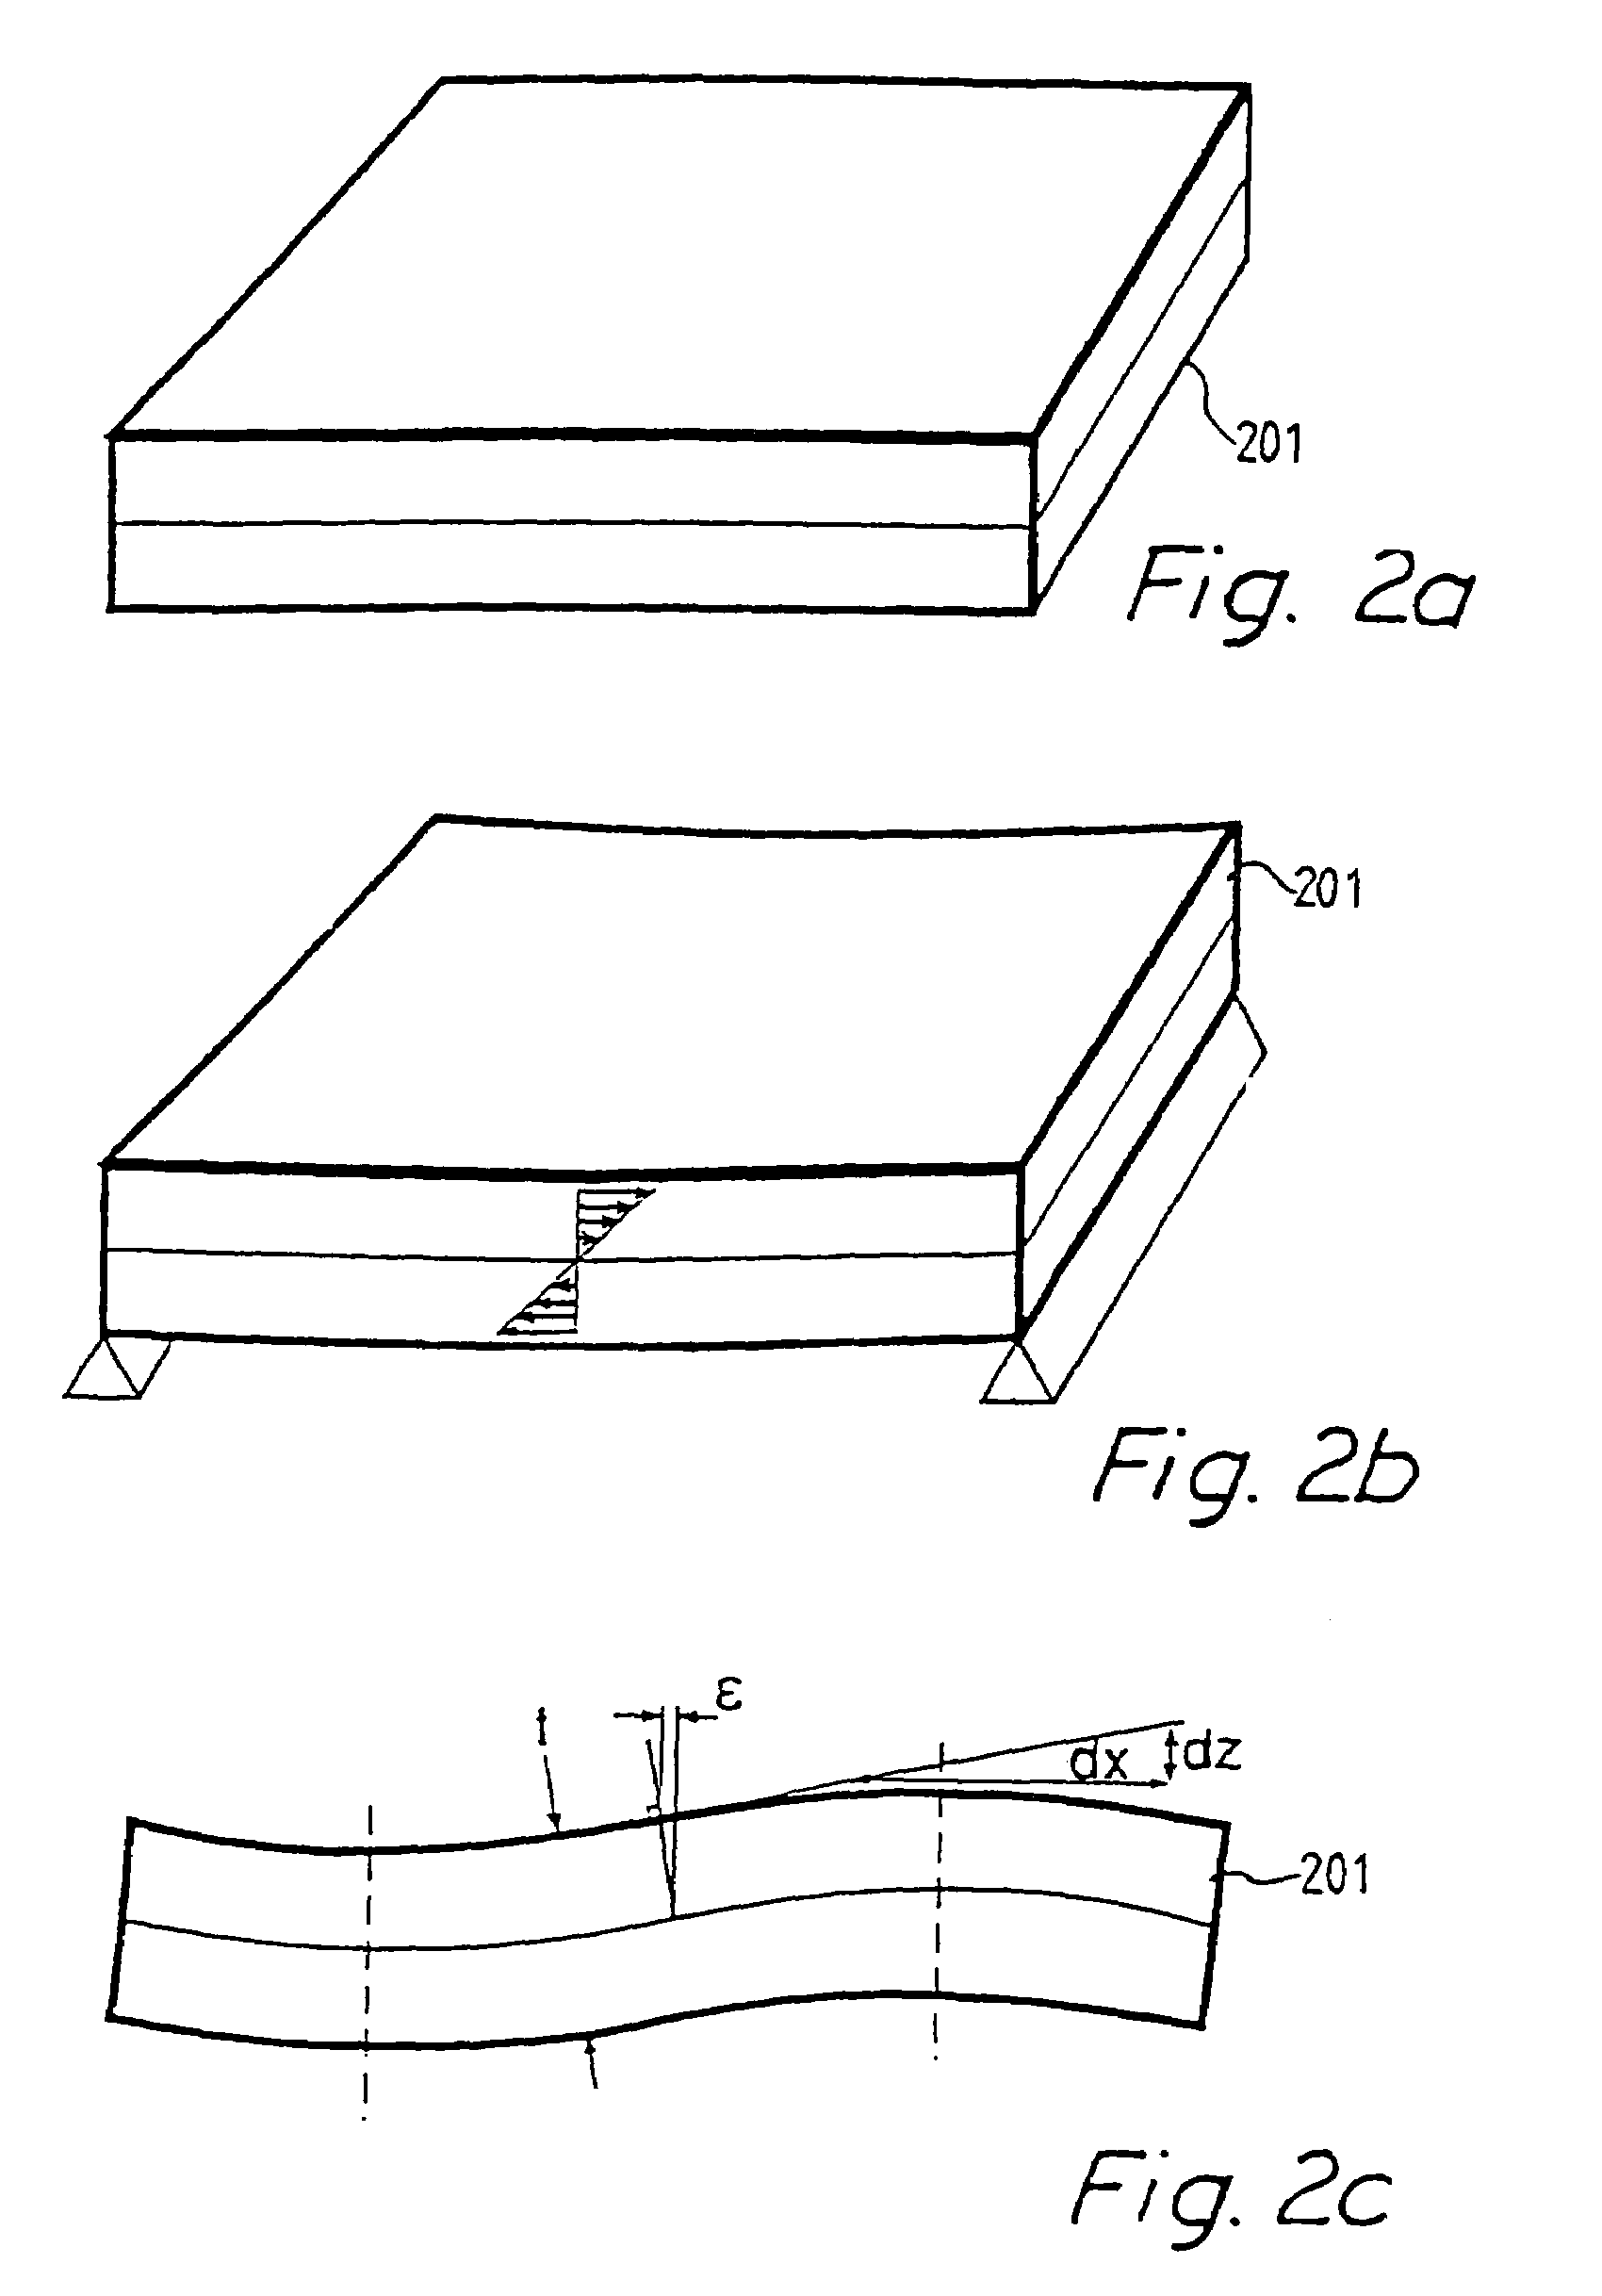 Method for error reduction in lithography